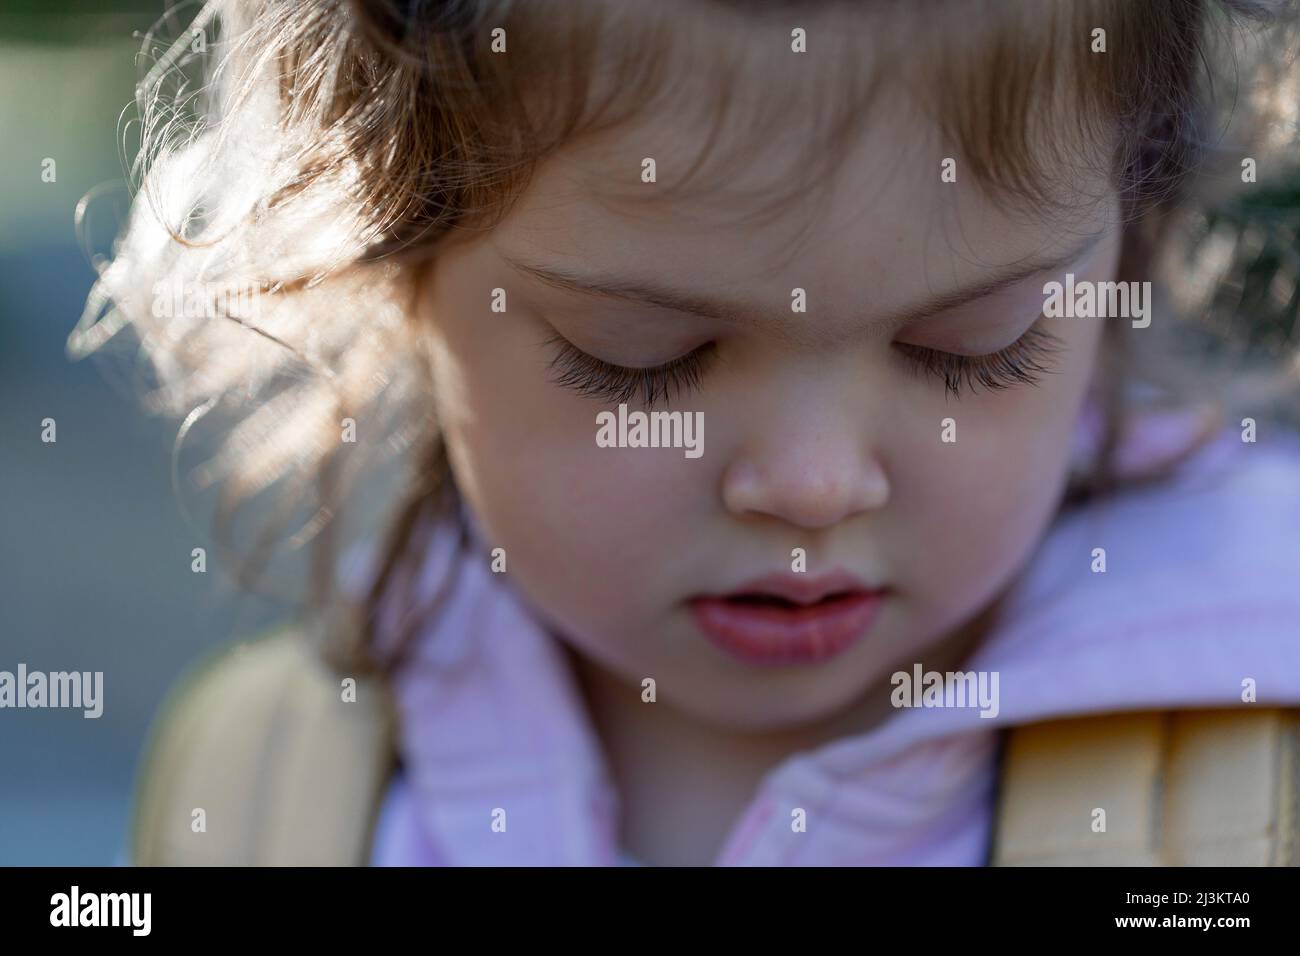 Close-up portrait of a preschooler girl with long eyelashes, looking down; North Vancouver, British Columbia, Canada Stock Photo